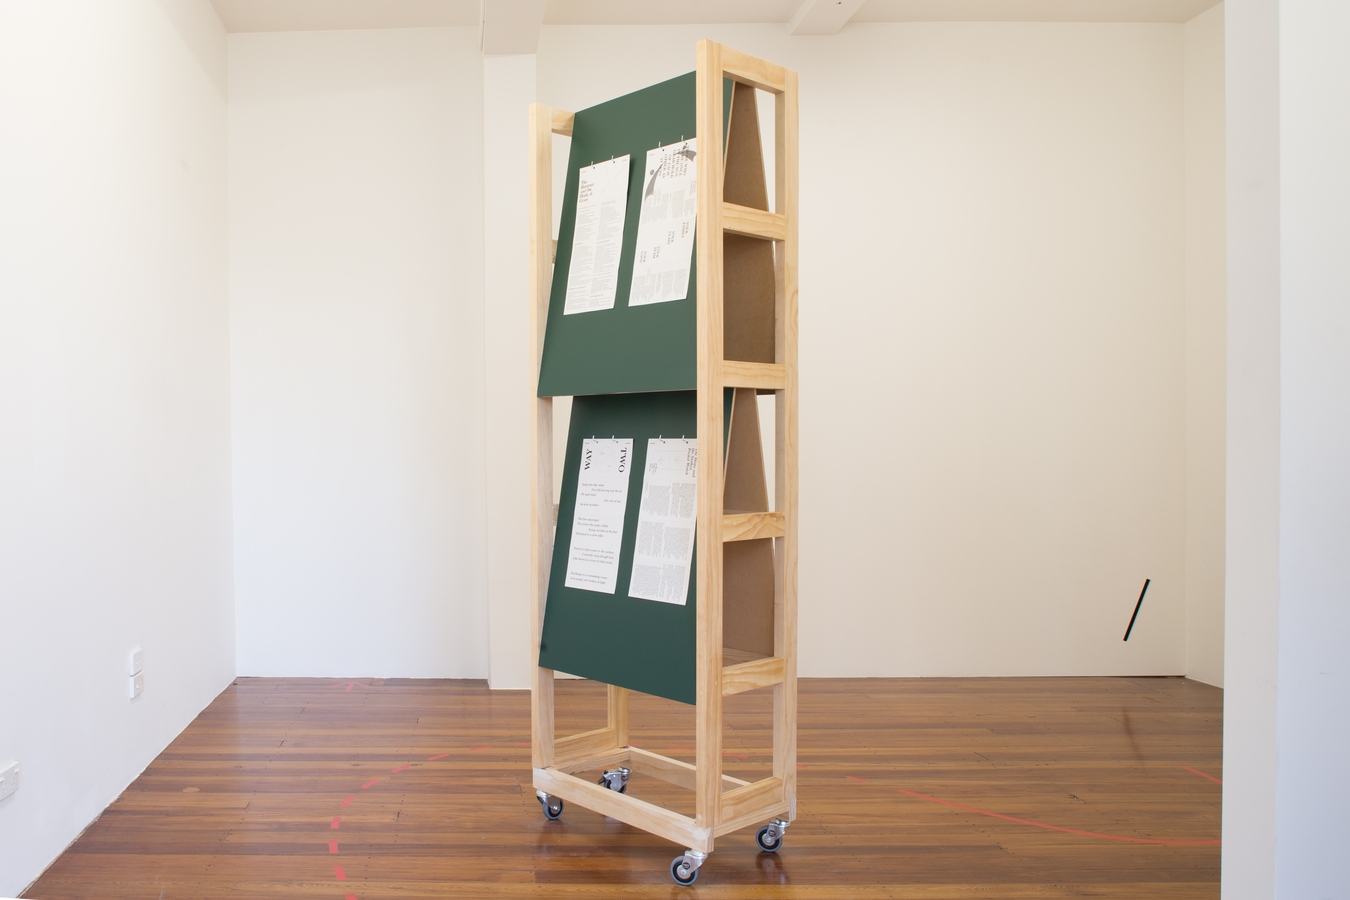 Image: Daniel Shaskey, System to System (installation view), 2019-2020. Digitally printed take home publication and timber kiosk. Photo: Janneth Gil.